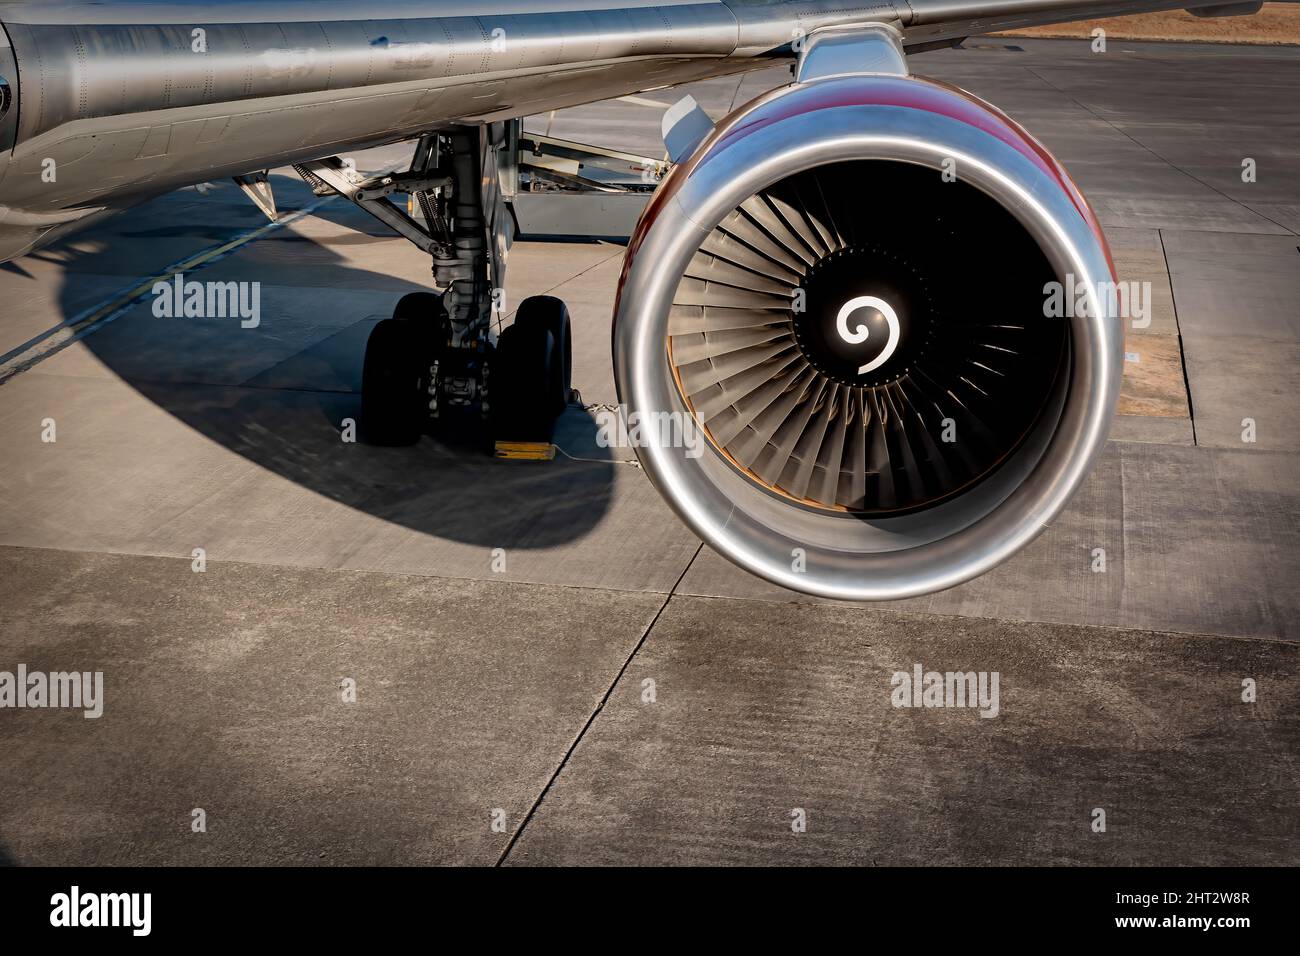 The wing and jet engine turbine of an airliner sitting on a runway near Tokyo, Japan. Stock Photo